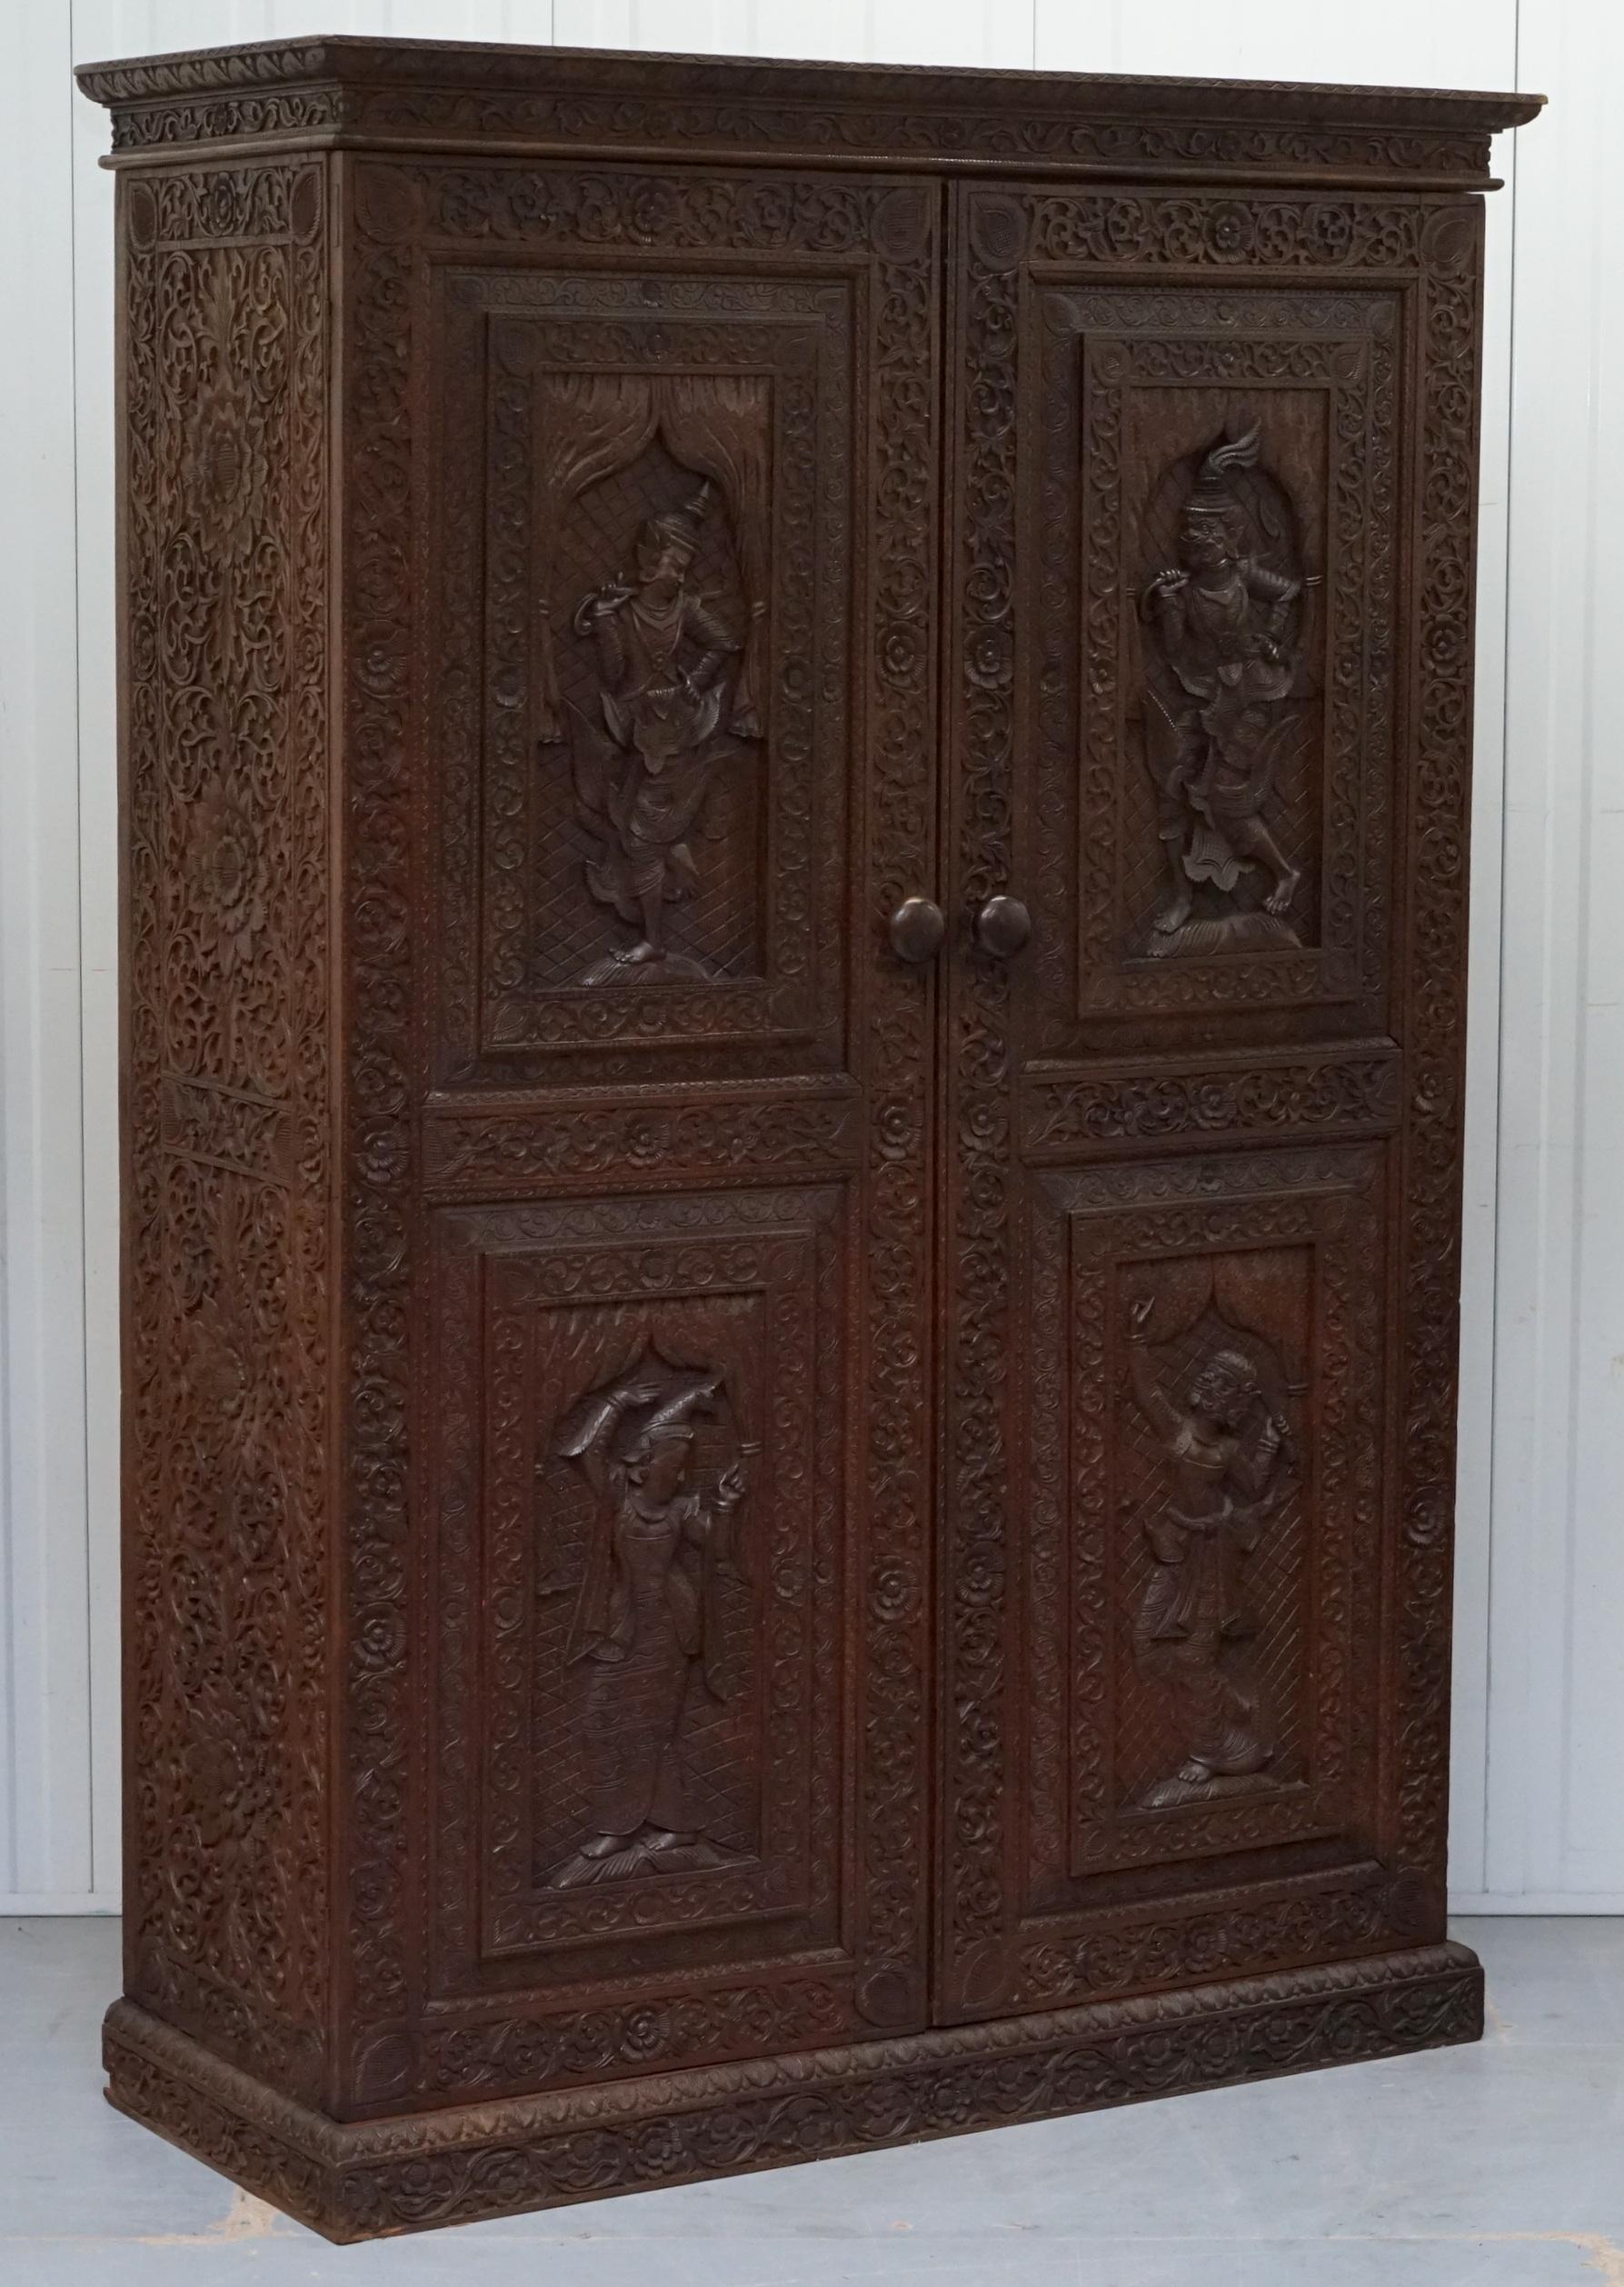 Wimbledon-Furniture

Wimbledon-Furniture is delighted to offer for sale this very rare, circa 1910 solid Rosewood Anglo Indian Burmese hand carved from top to bottom wardrobe cabinet with built-in campaign drawers

Please note the delivery fee